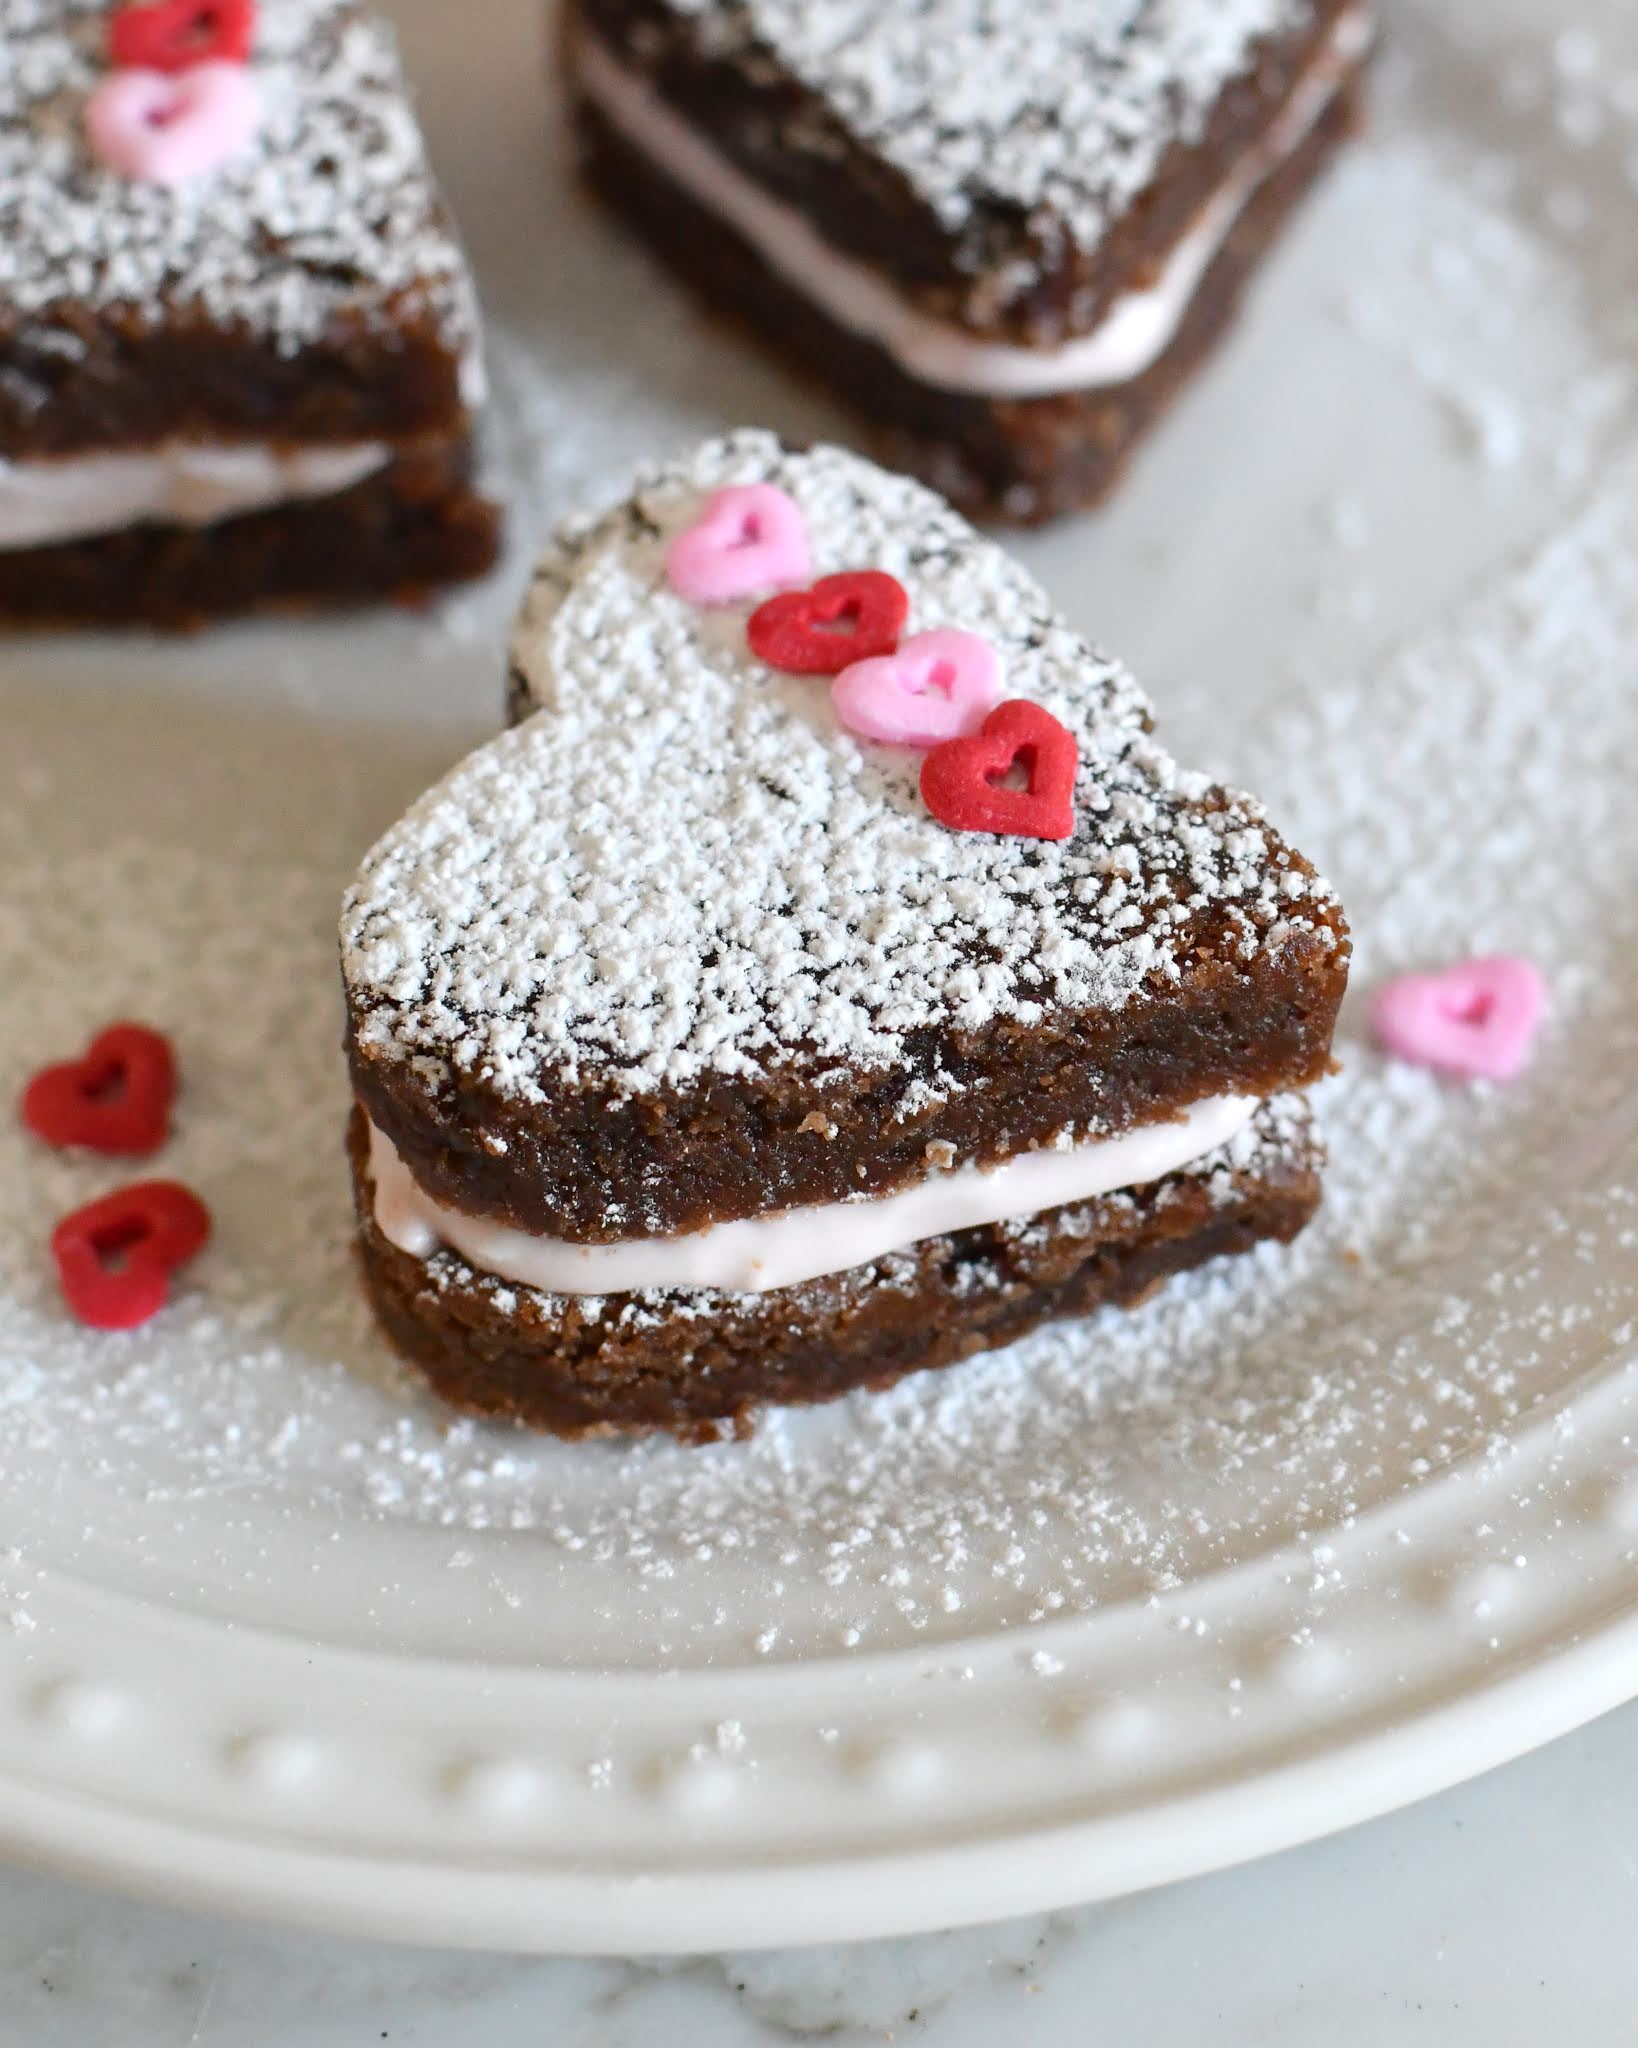 Heart-Shaped Brownie Sandwiches with Strawberry Mousse recipe